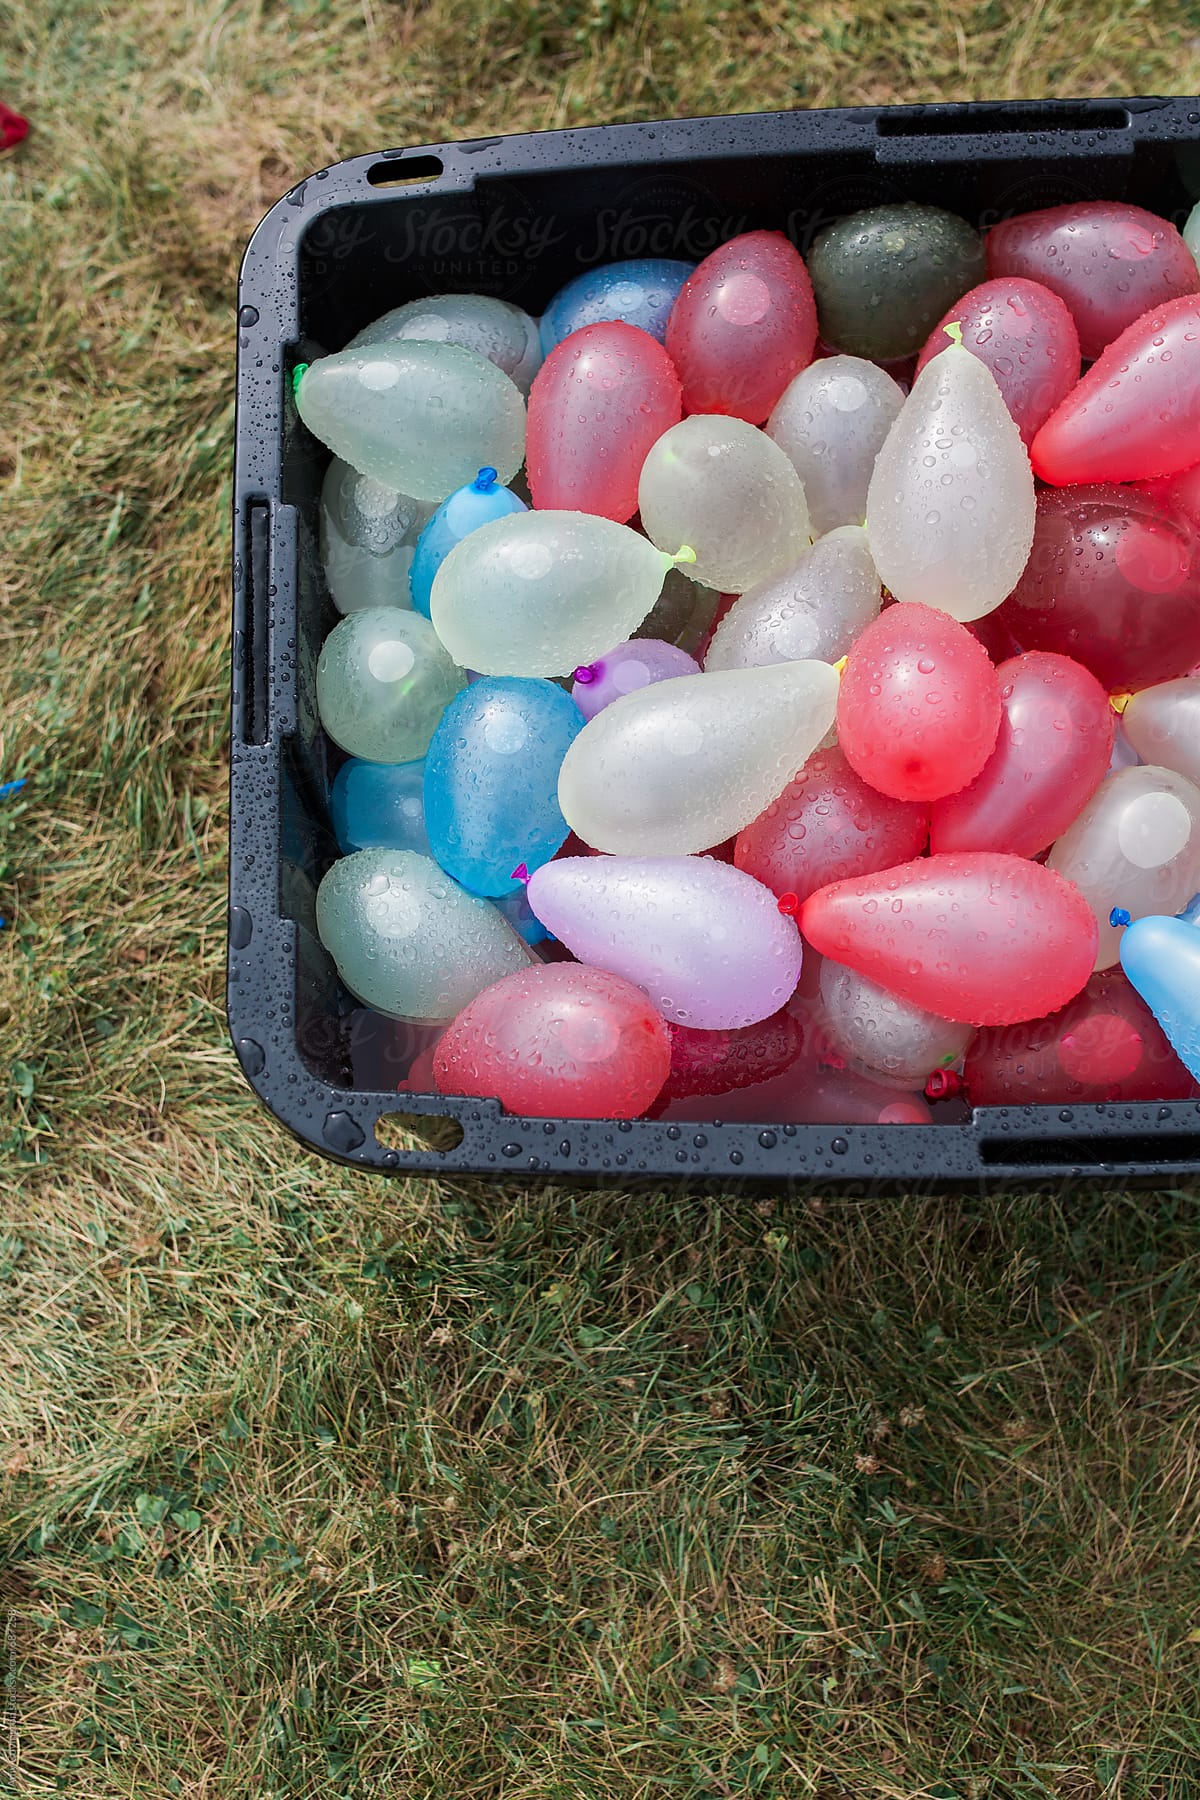 A container filled with water balloons